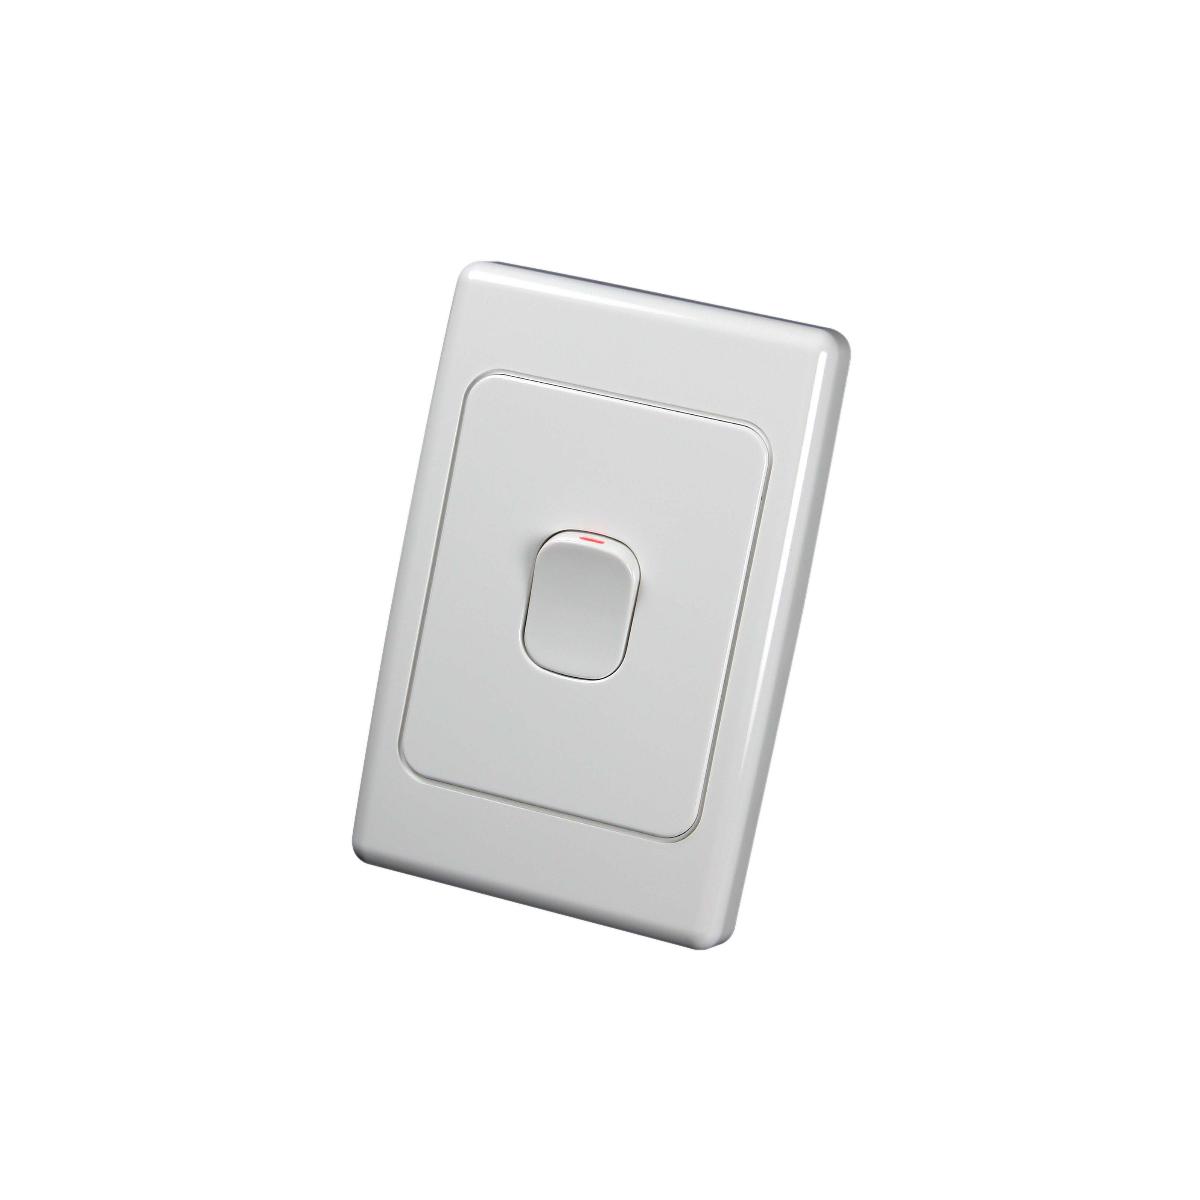 2000 COOKER SWITCH 45A S/P WHITE